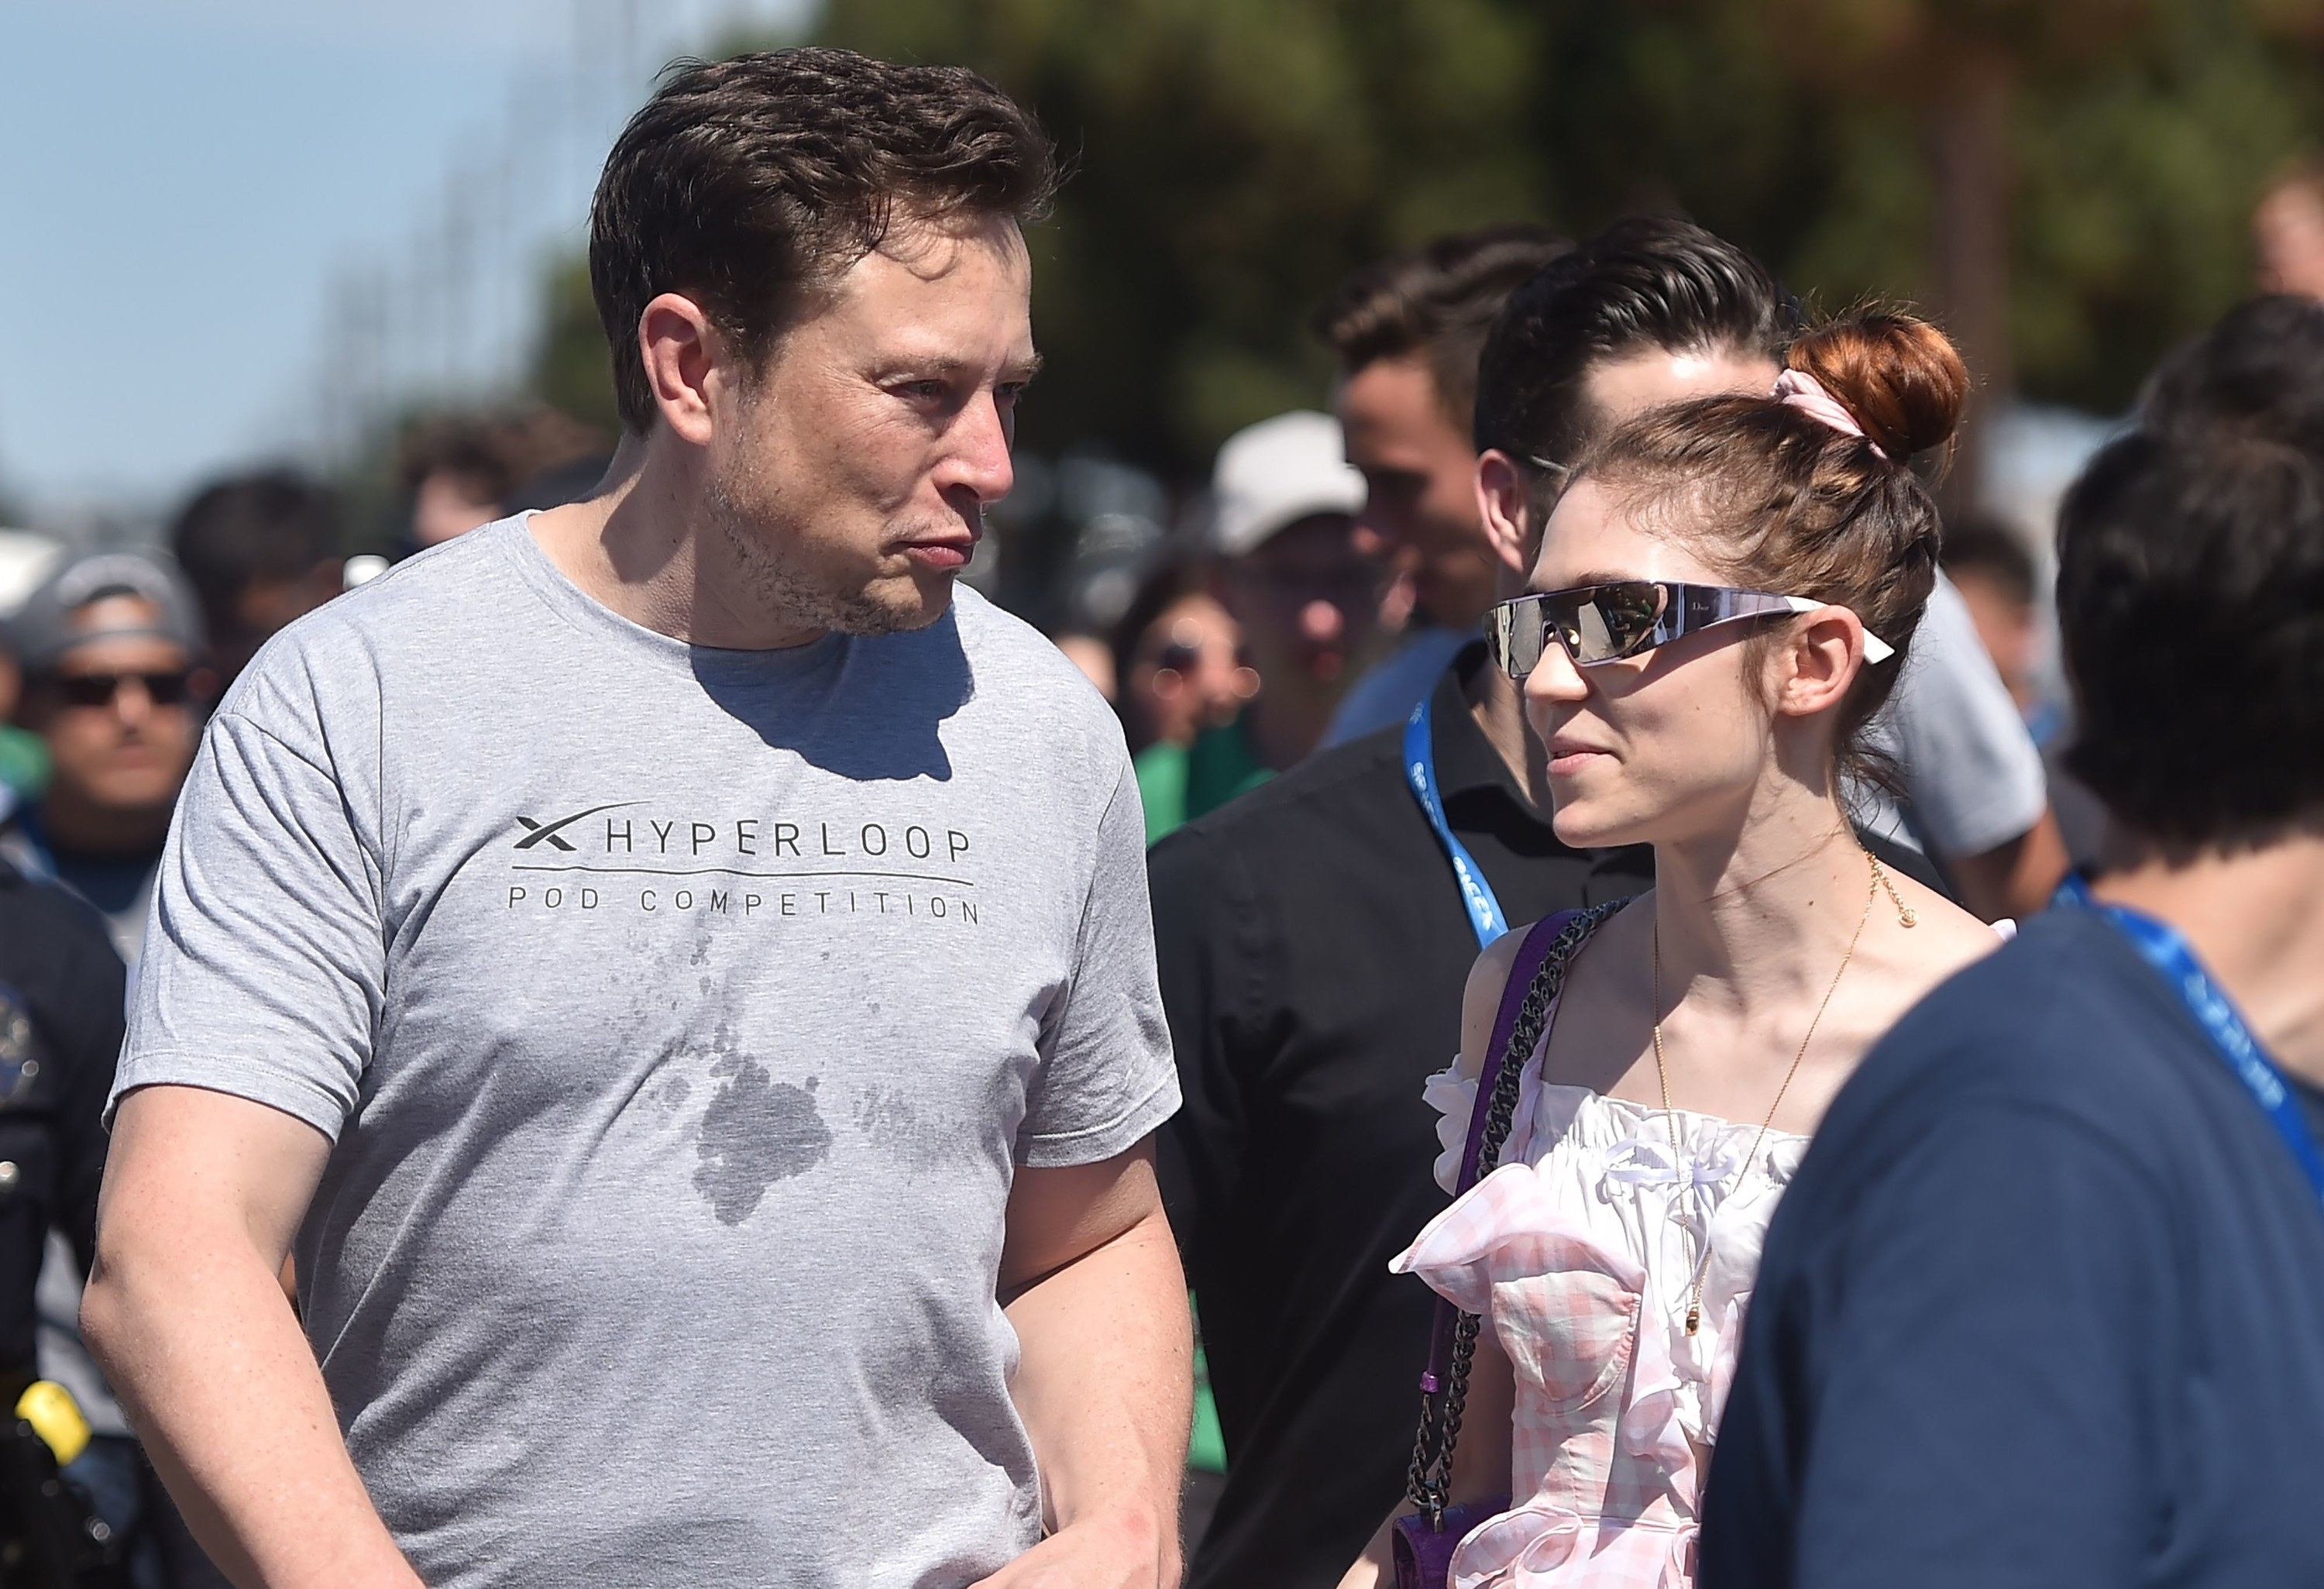 Elon Musk and Grimes, dressed in casual clothes, look past each other while attending the 2018 Space X Hyperloop Pod Competition in Hawthorne, California 